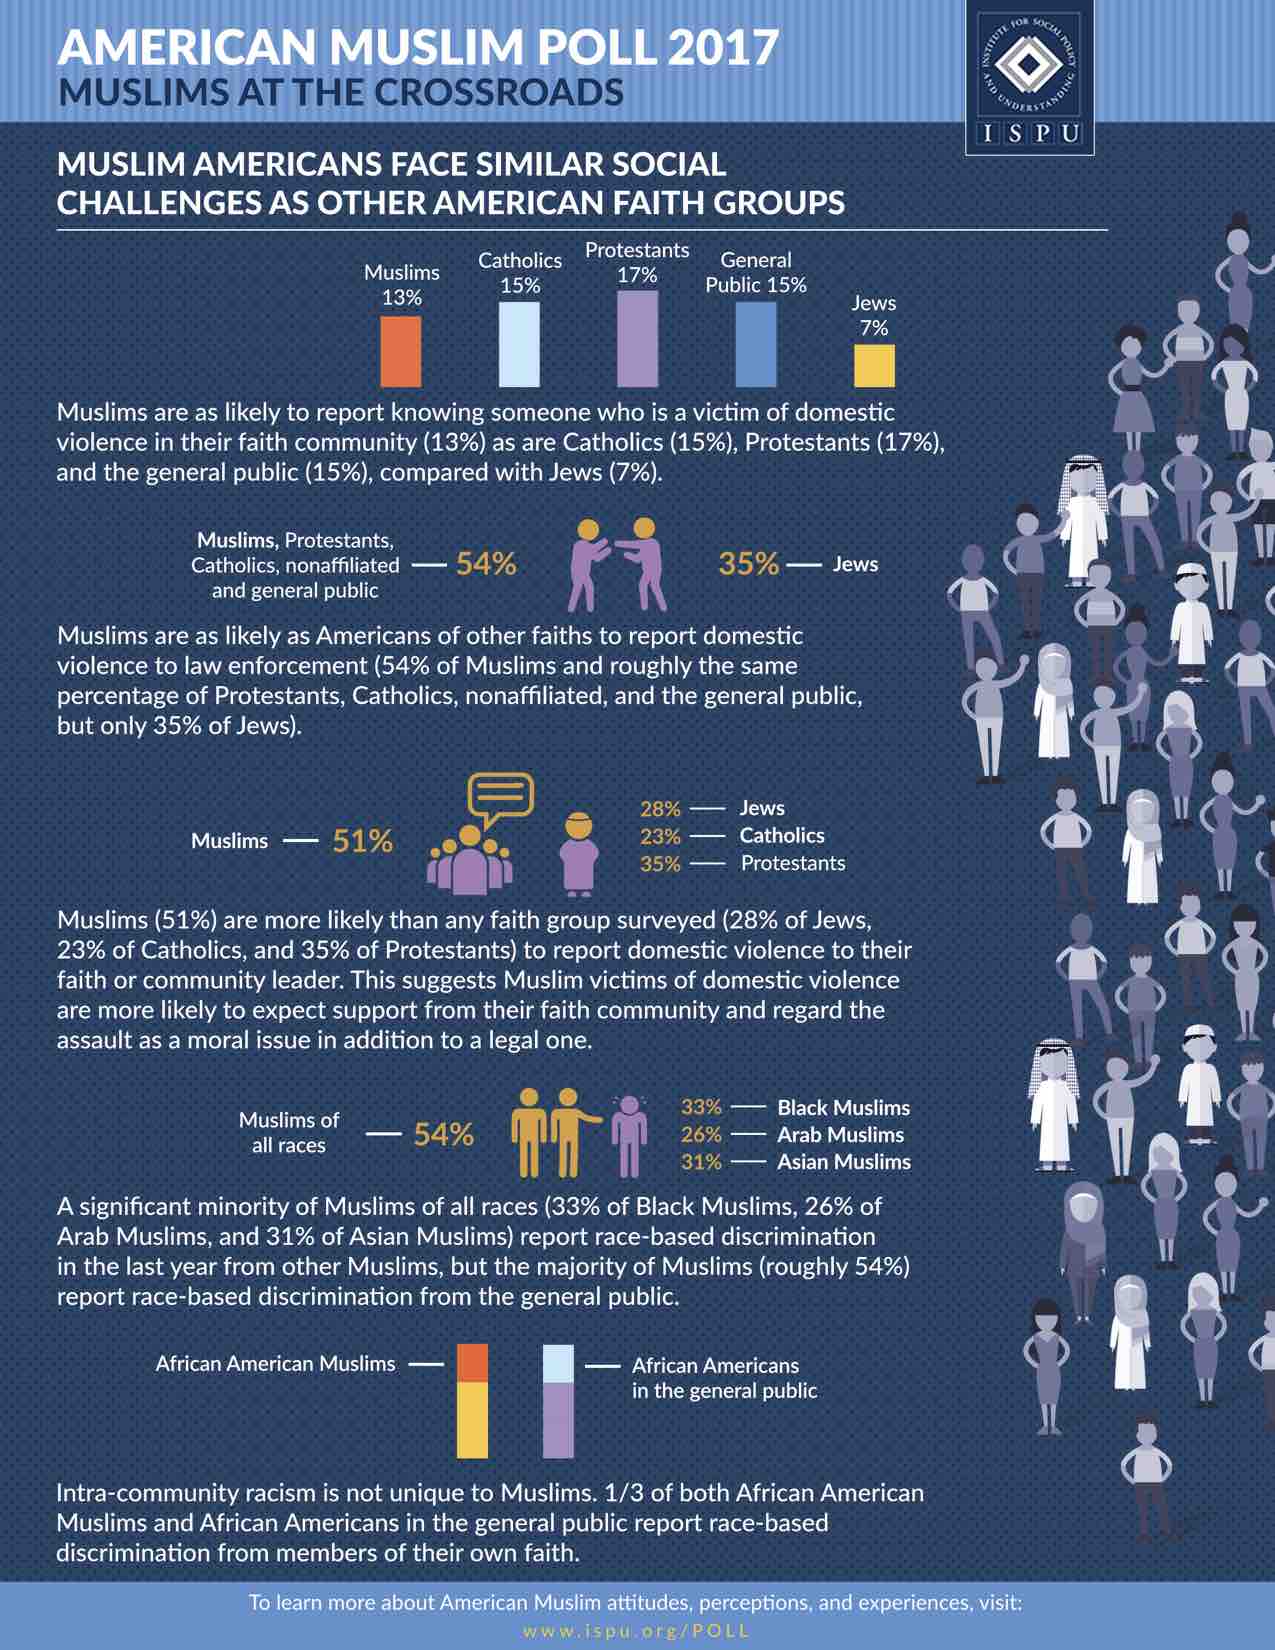 Infographic showing Muslim Americans Face Similar Social Challenges as Other American Faith Groups